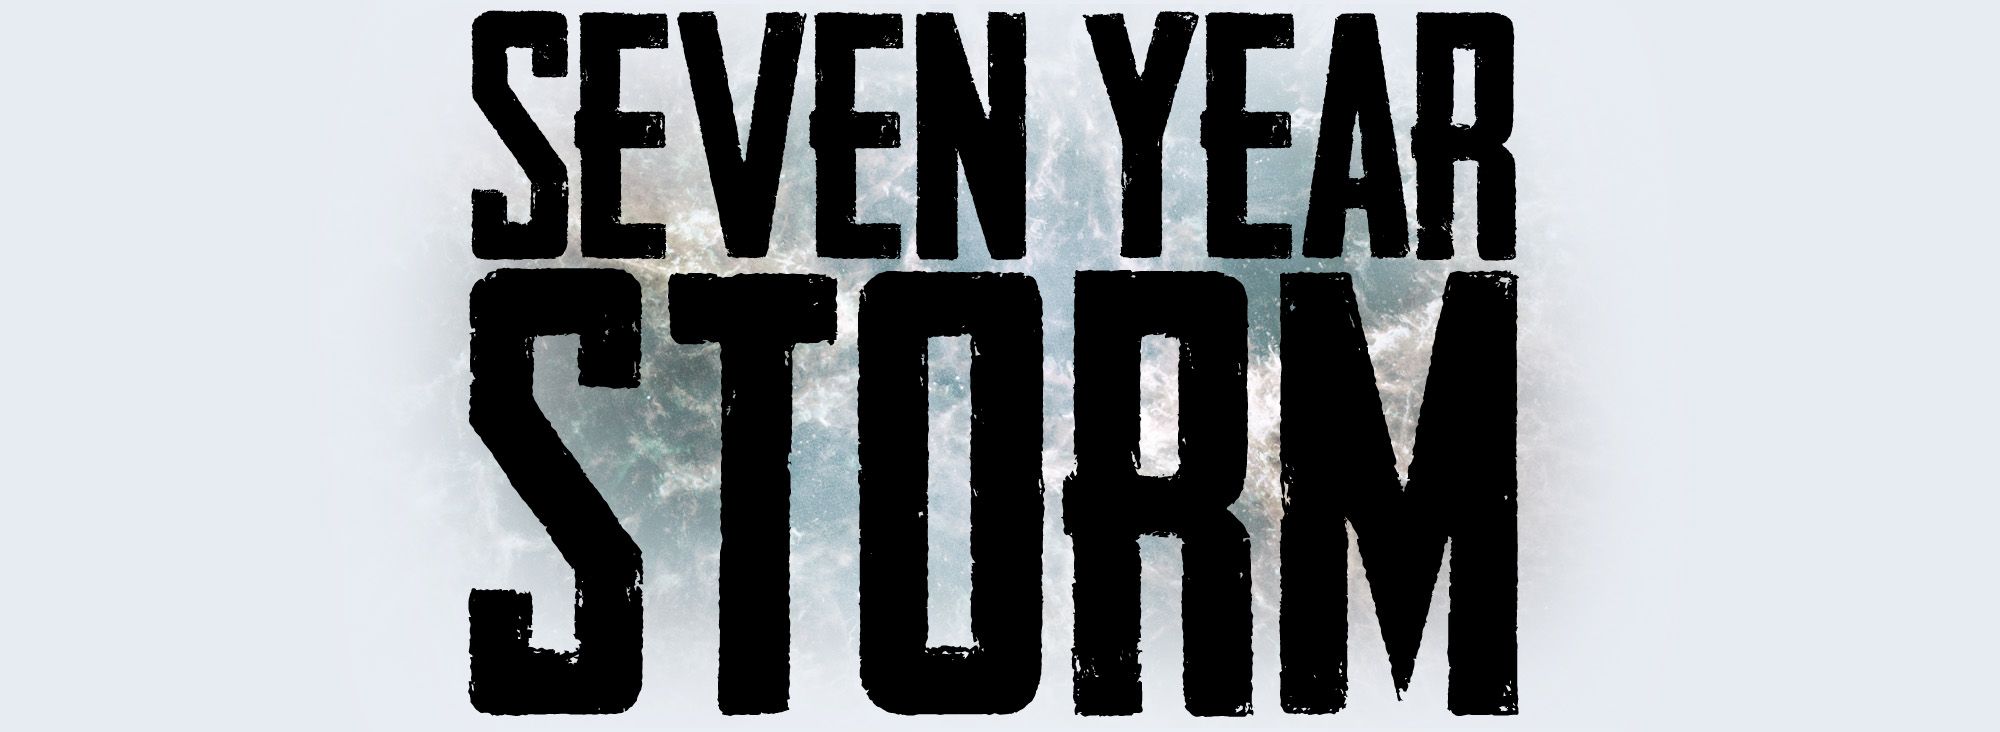 Seven Year Storm